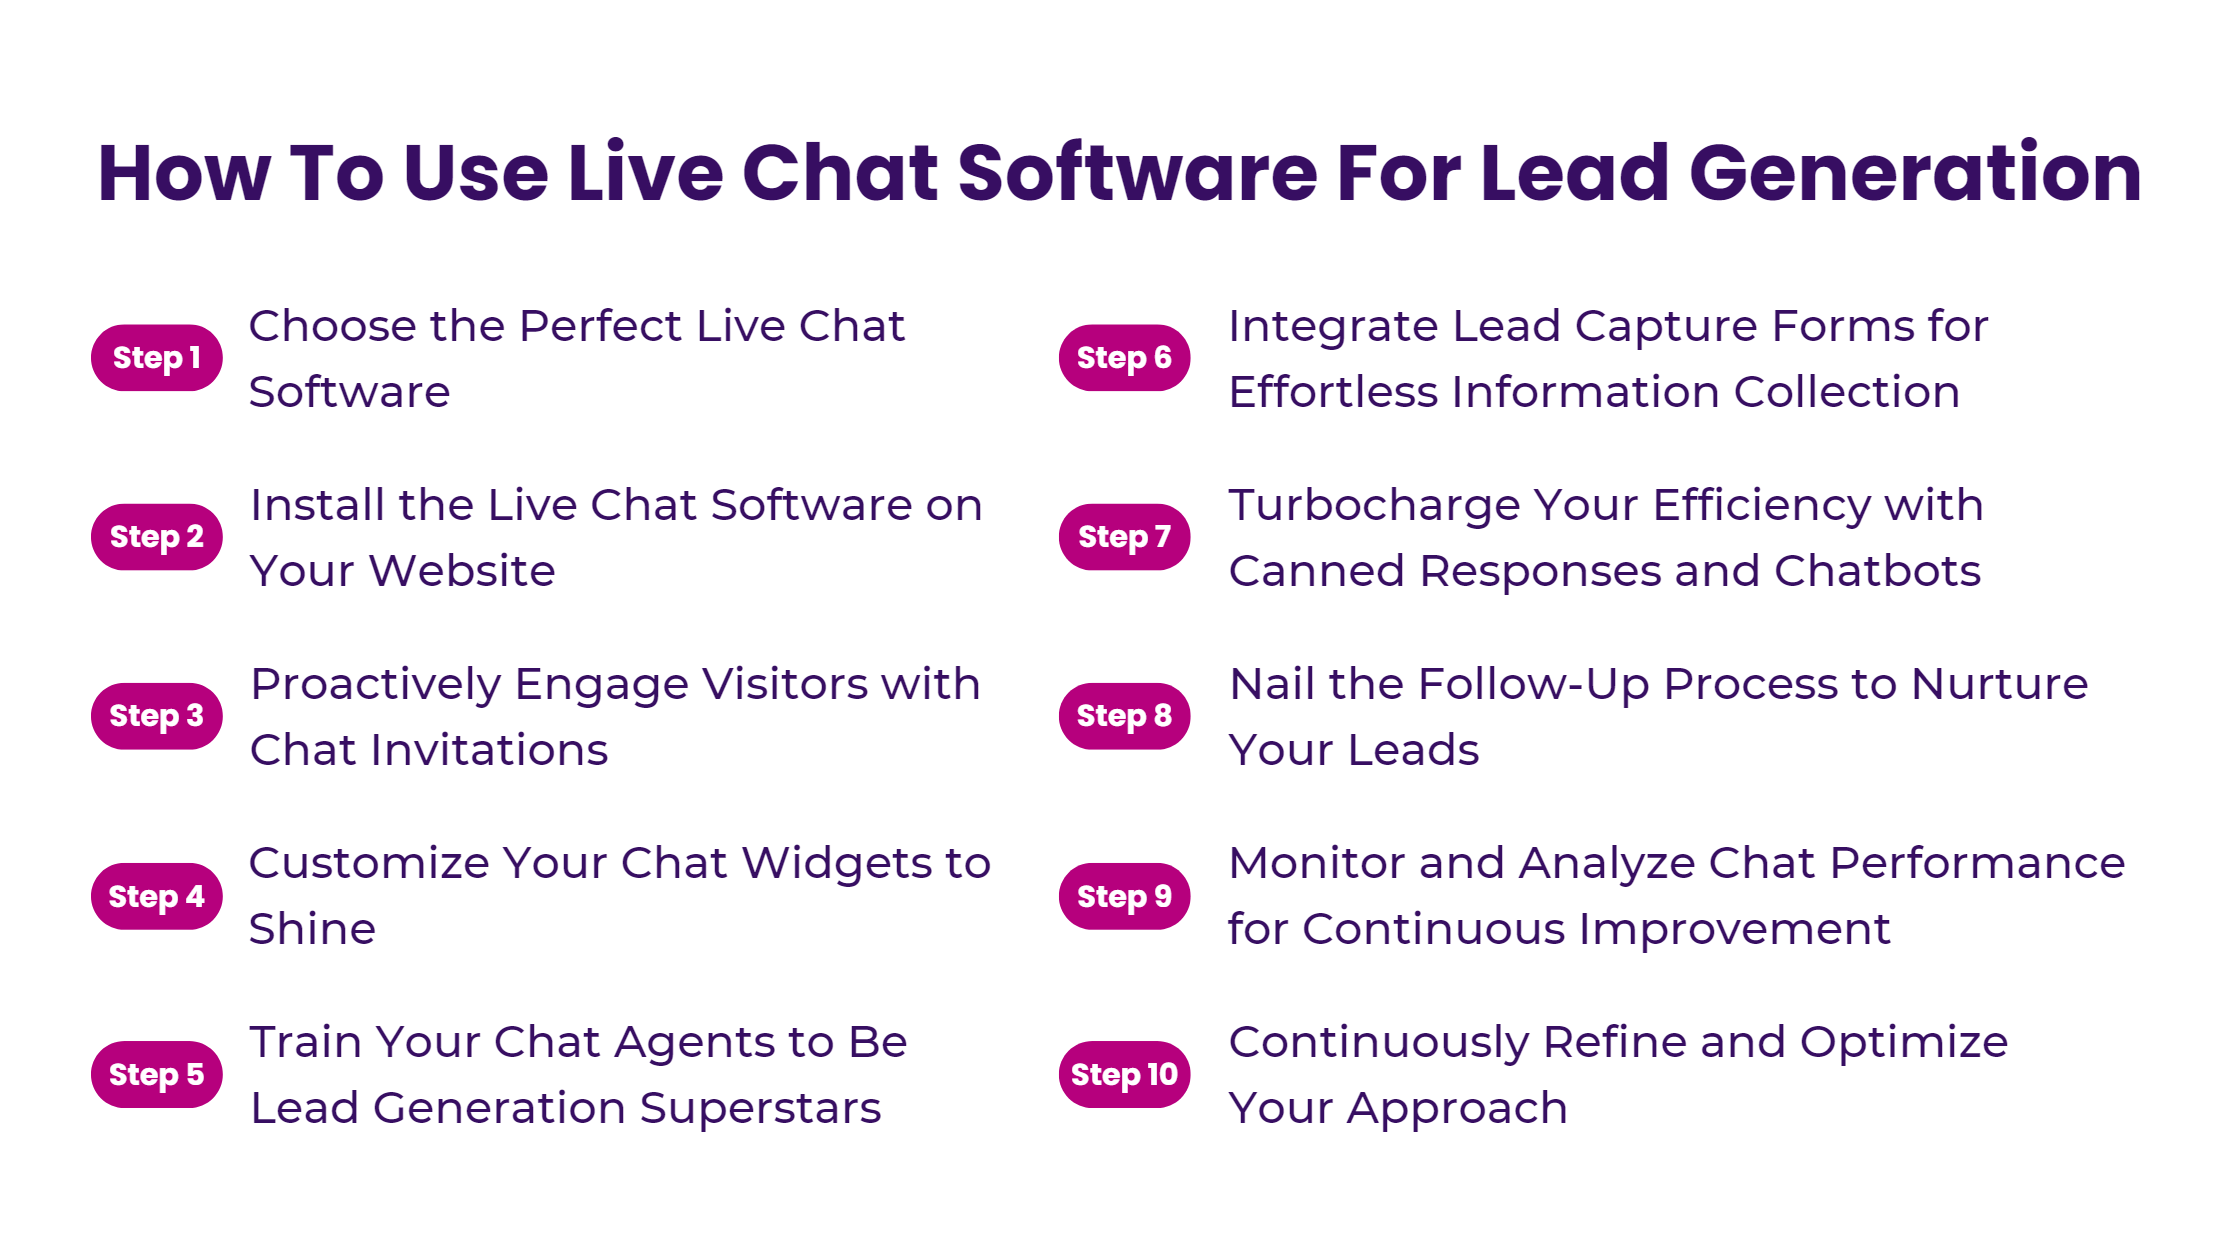 How To Use Live Chat Software For Lead Generation